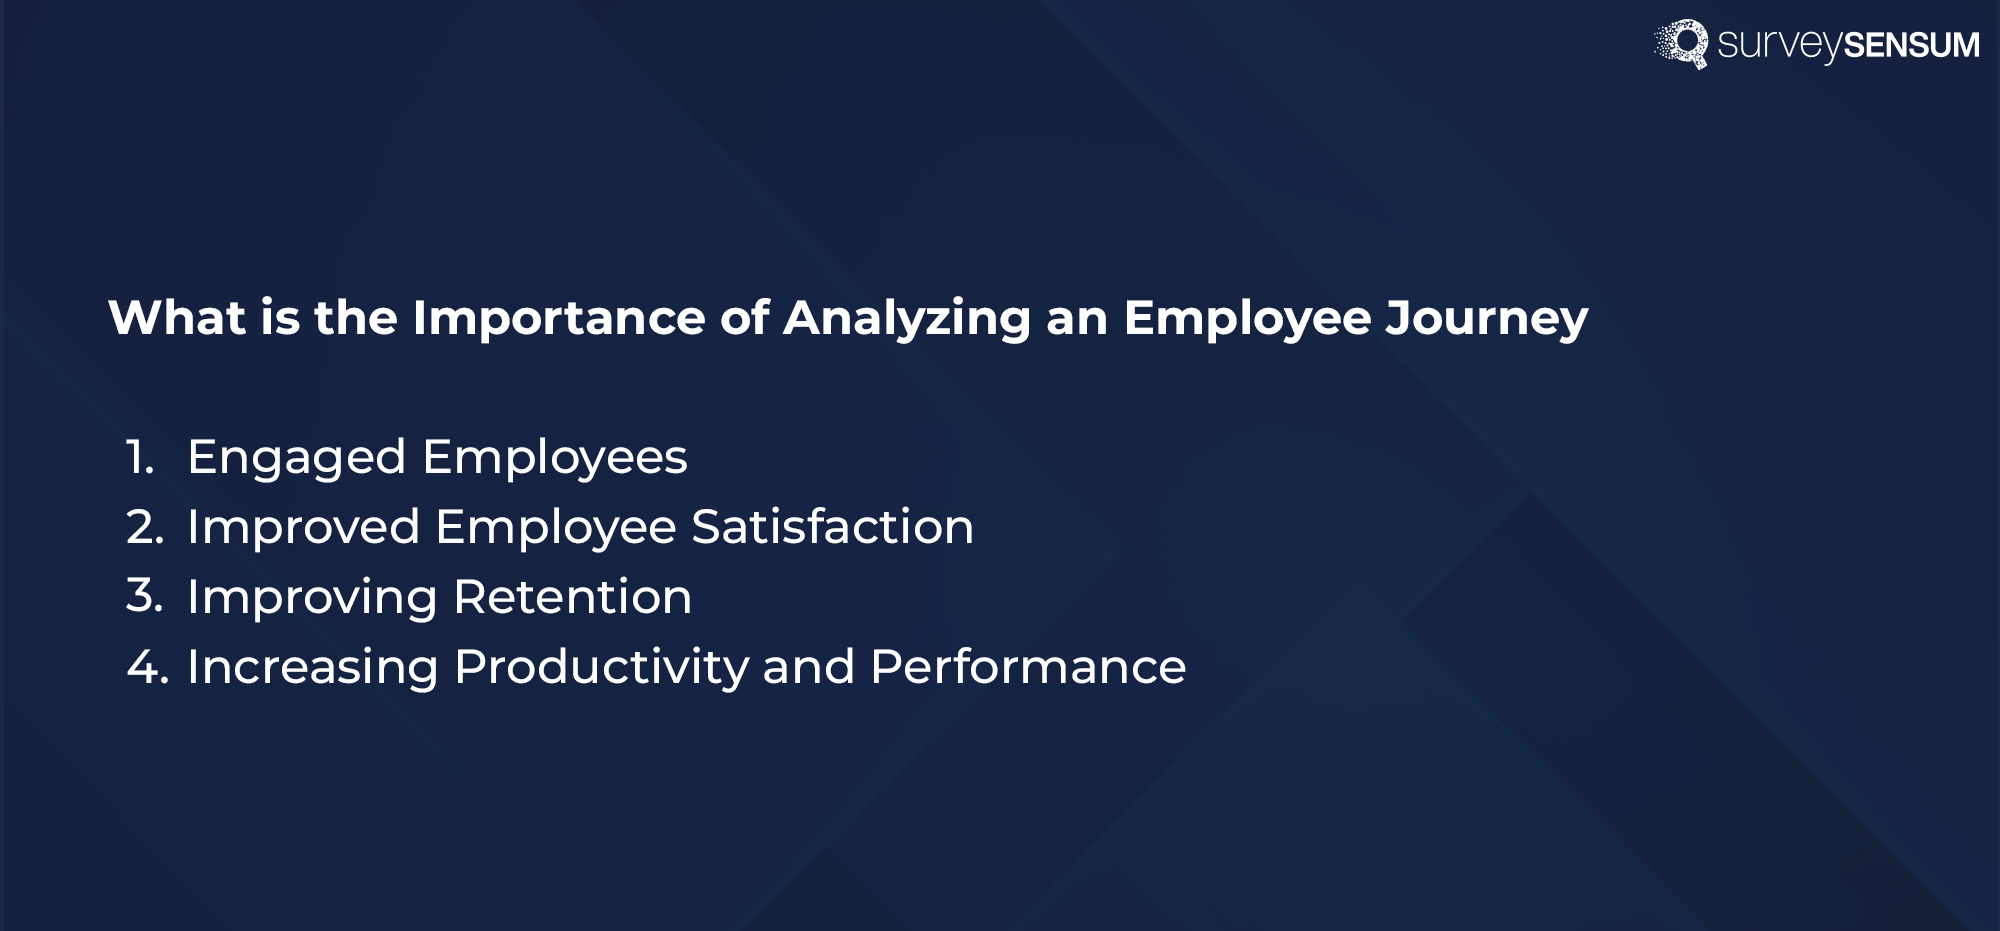 This image shows why an organization should study and analyze employee journeys. 